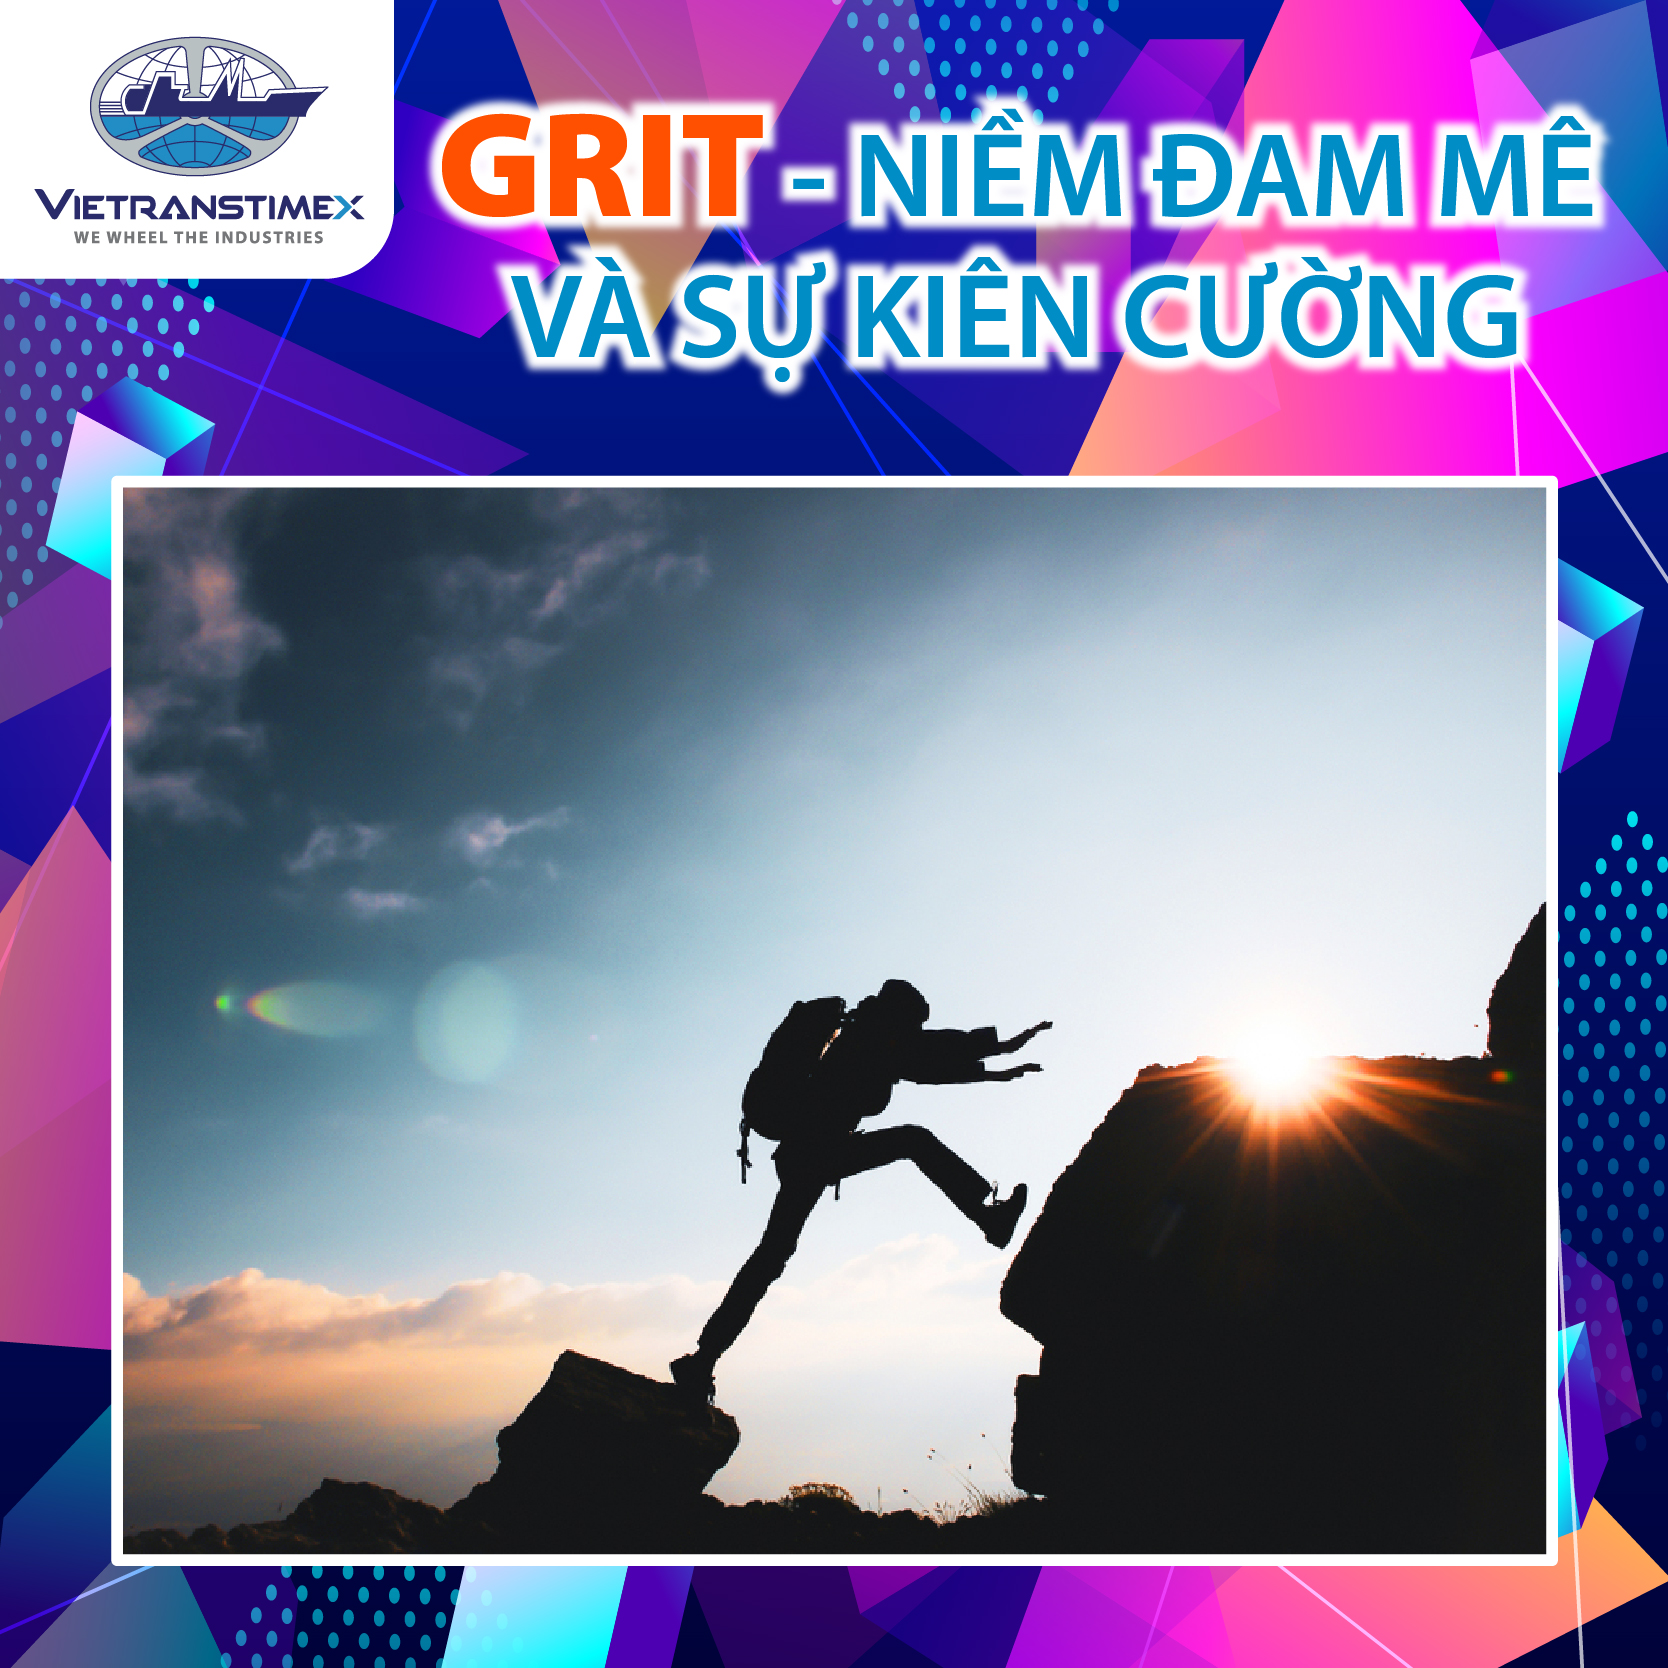 GRIT - THE POWER OF PASSION AND PERSEVERANCE